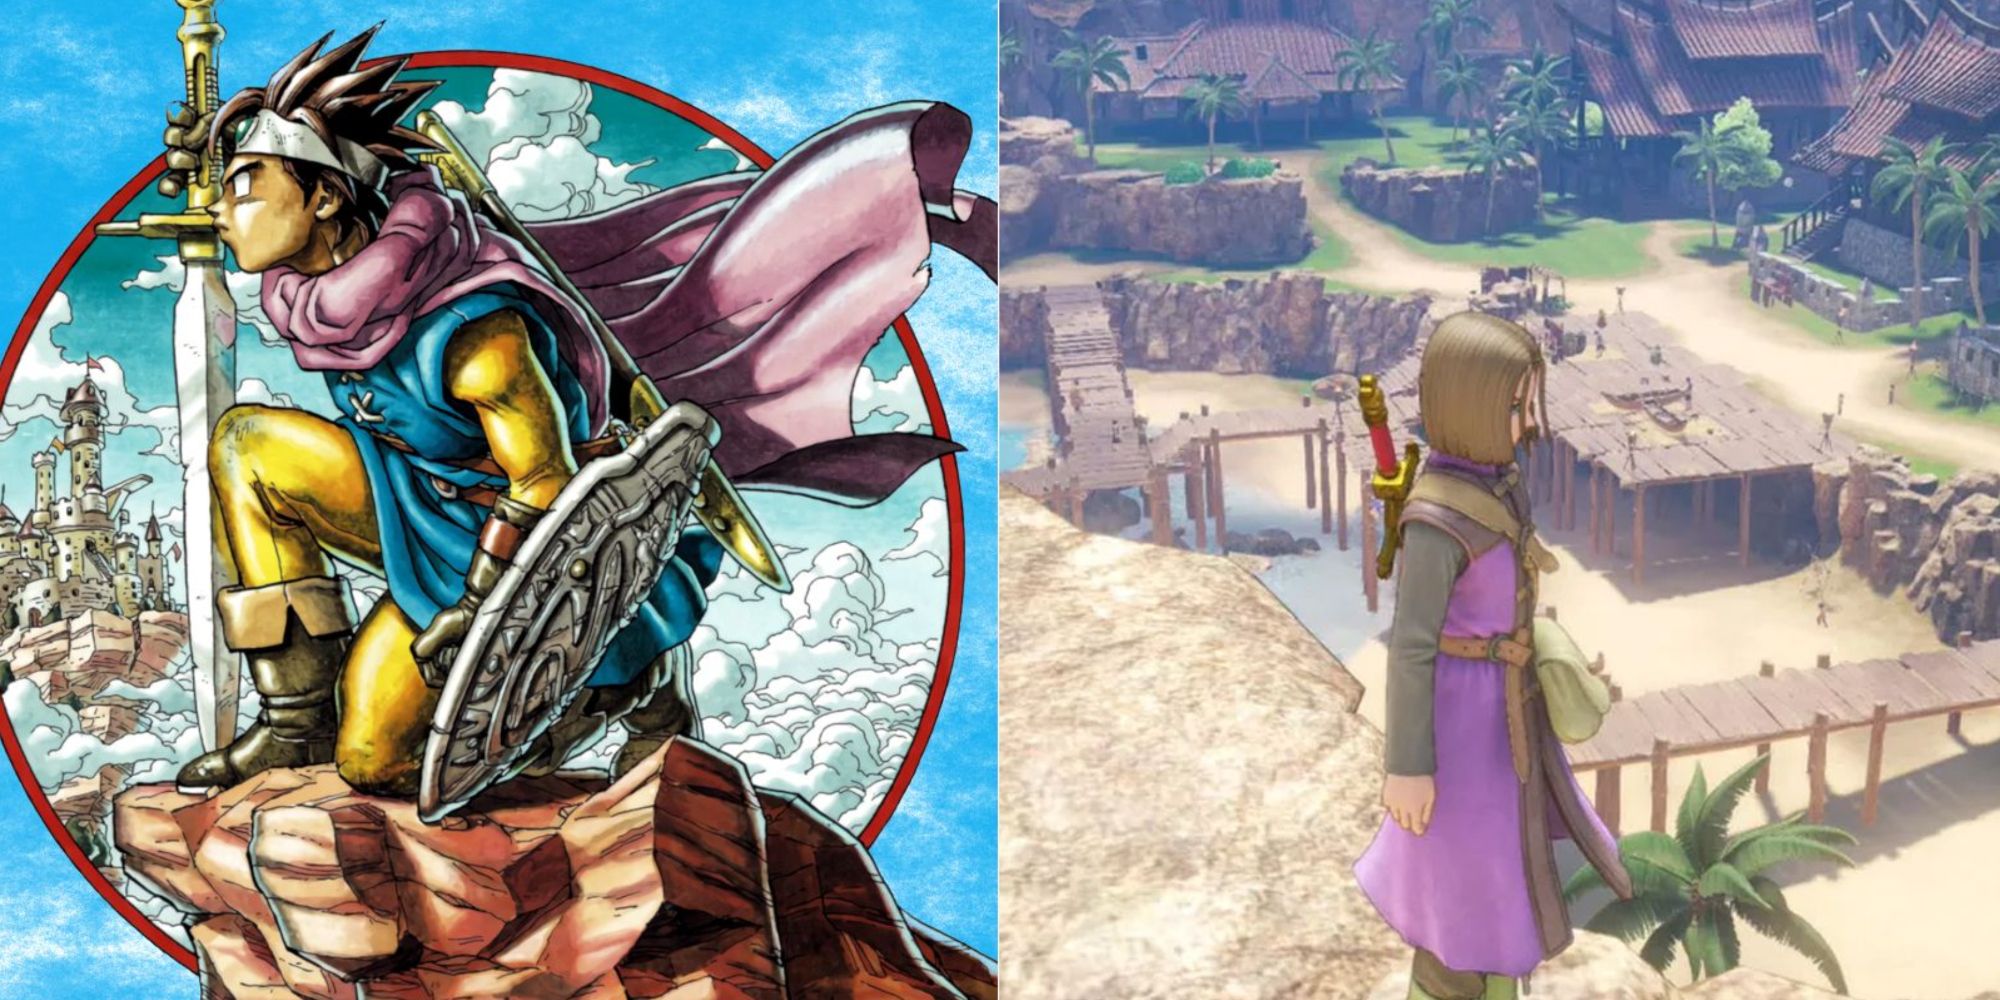 DQ3 and DQ11 Heroes peering from a clffside